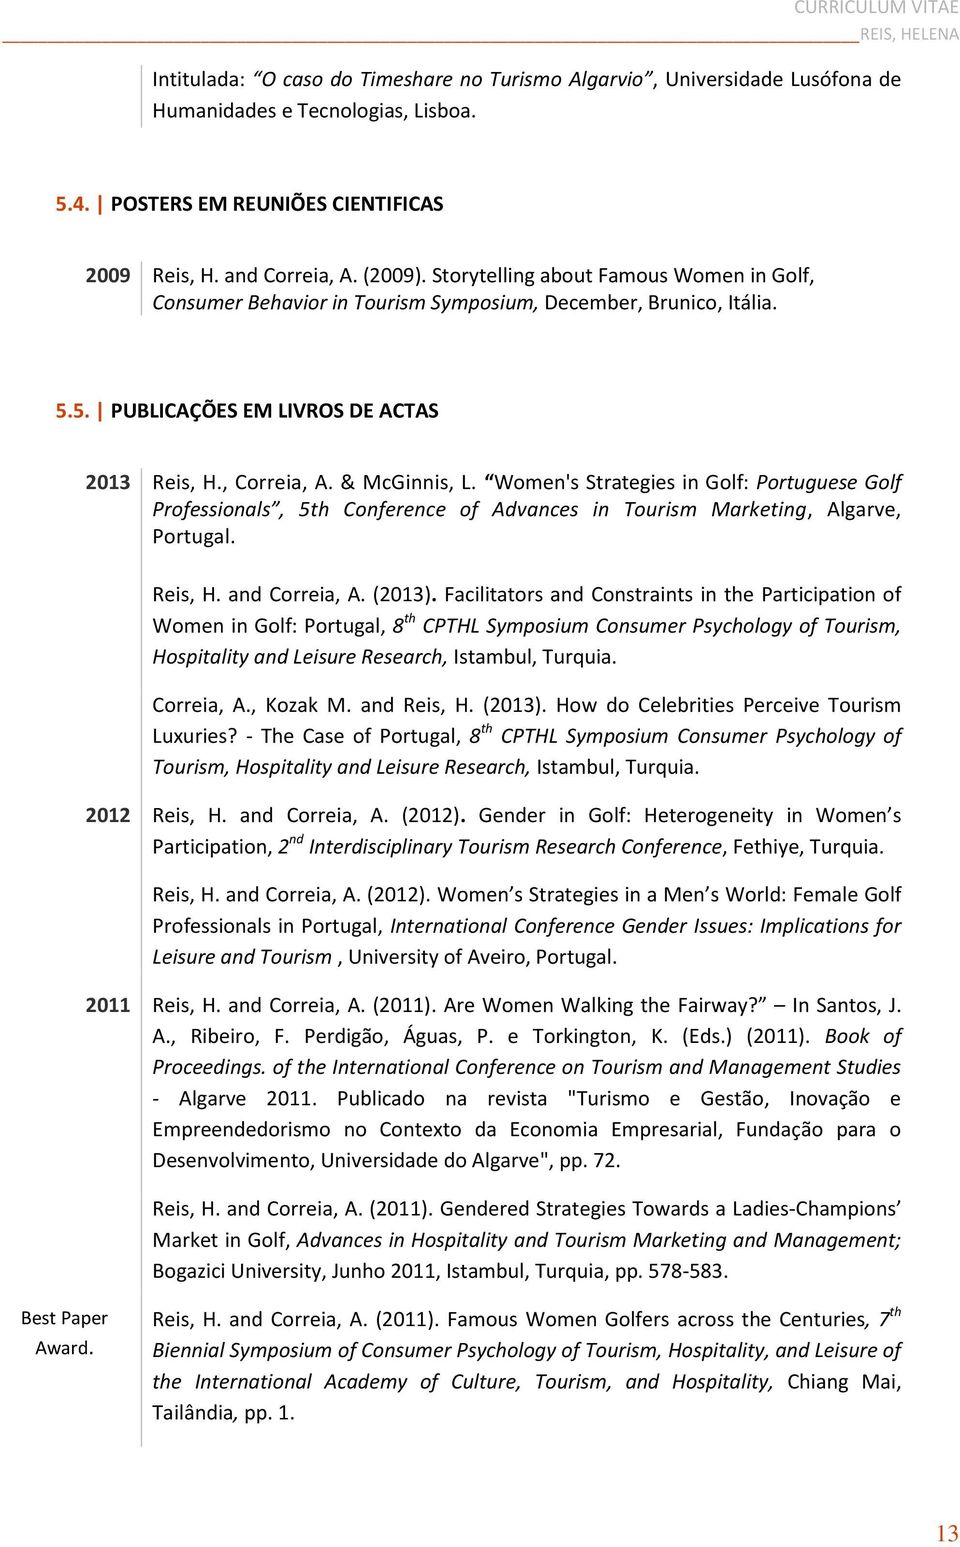 Women's Strategies in Golf: Portuguese Golf Professionals, 5th Conference of Advances in Tourism Marketing, Algarve, Portugal. Reis, H. and Correia, A. (2013).